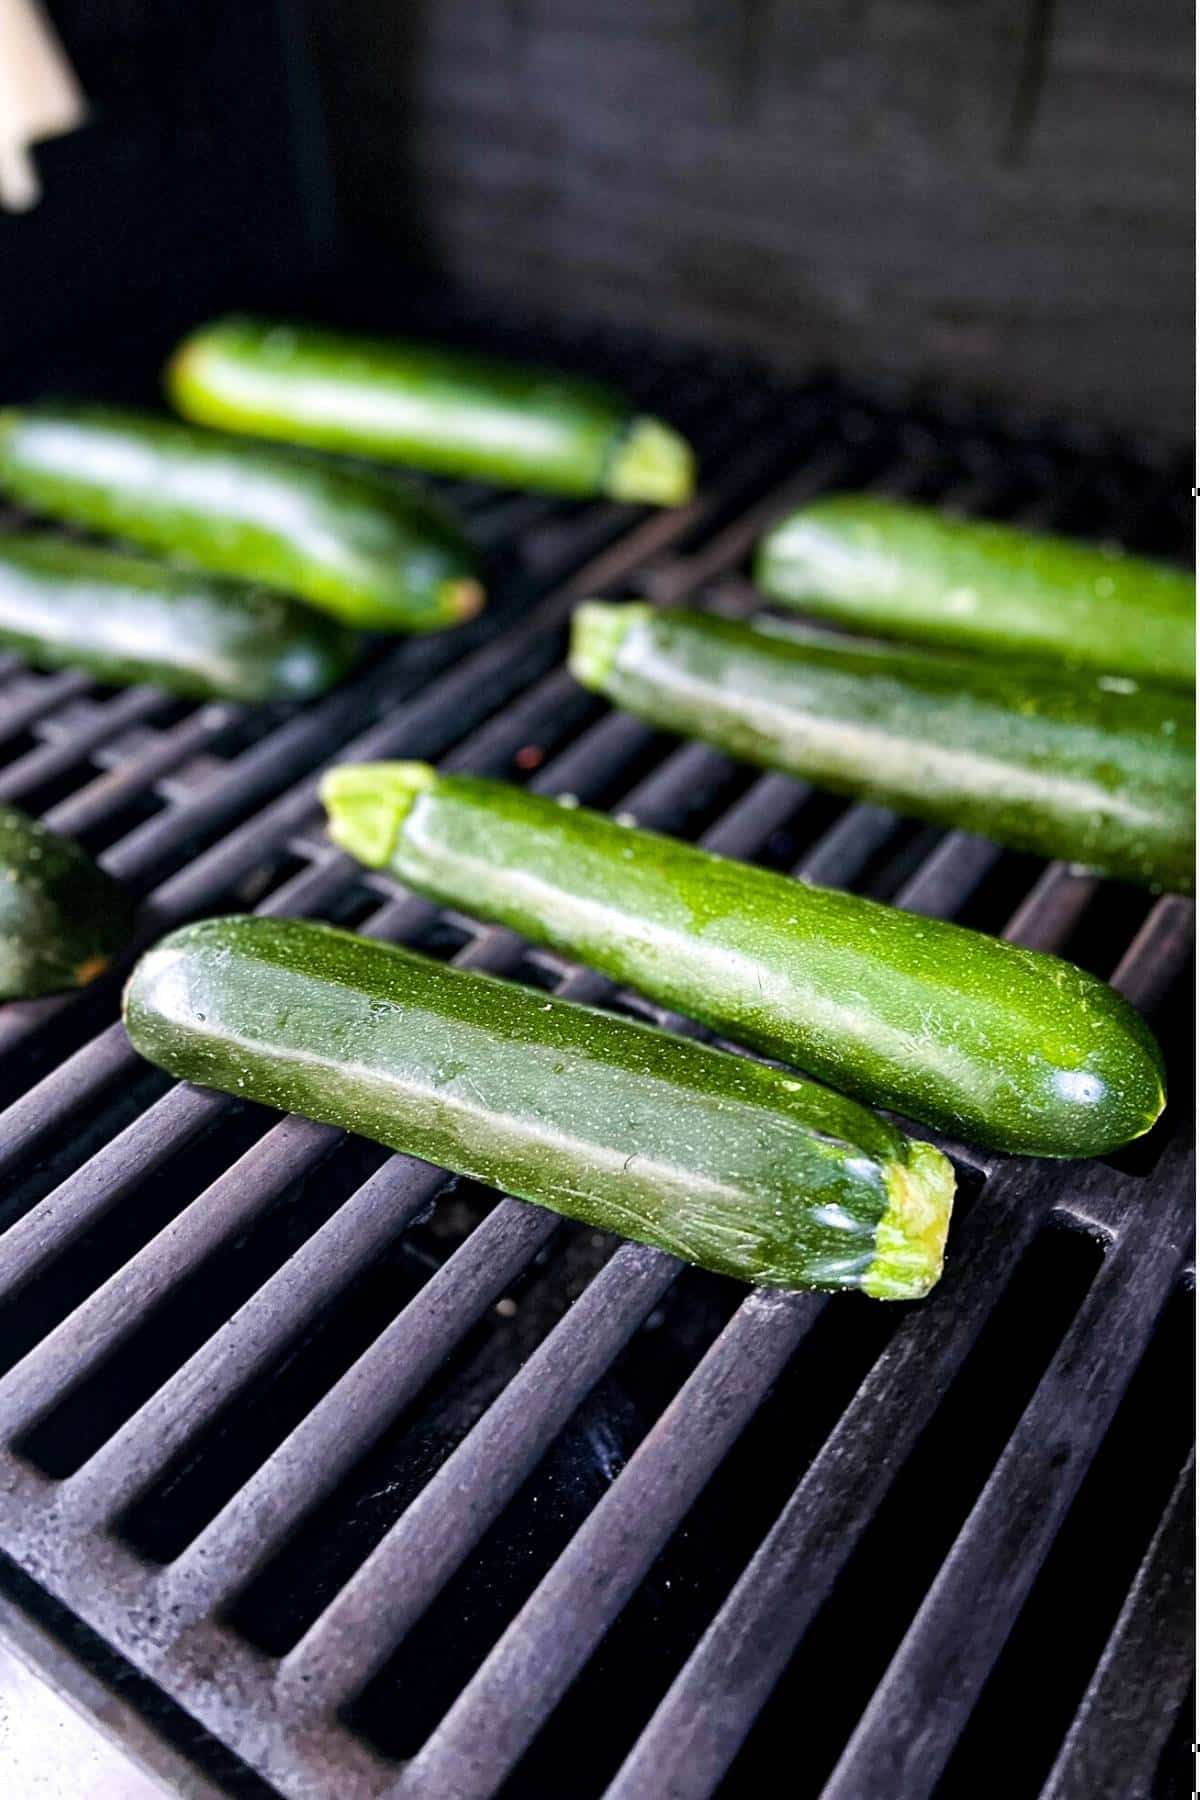 zucchini skins cooking on a grill